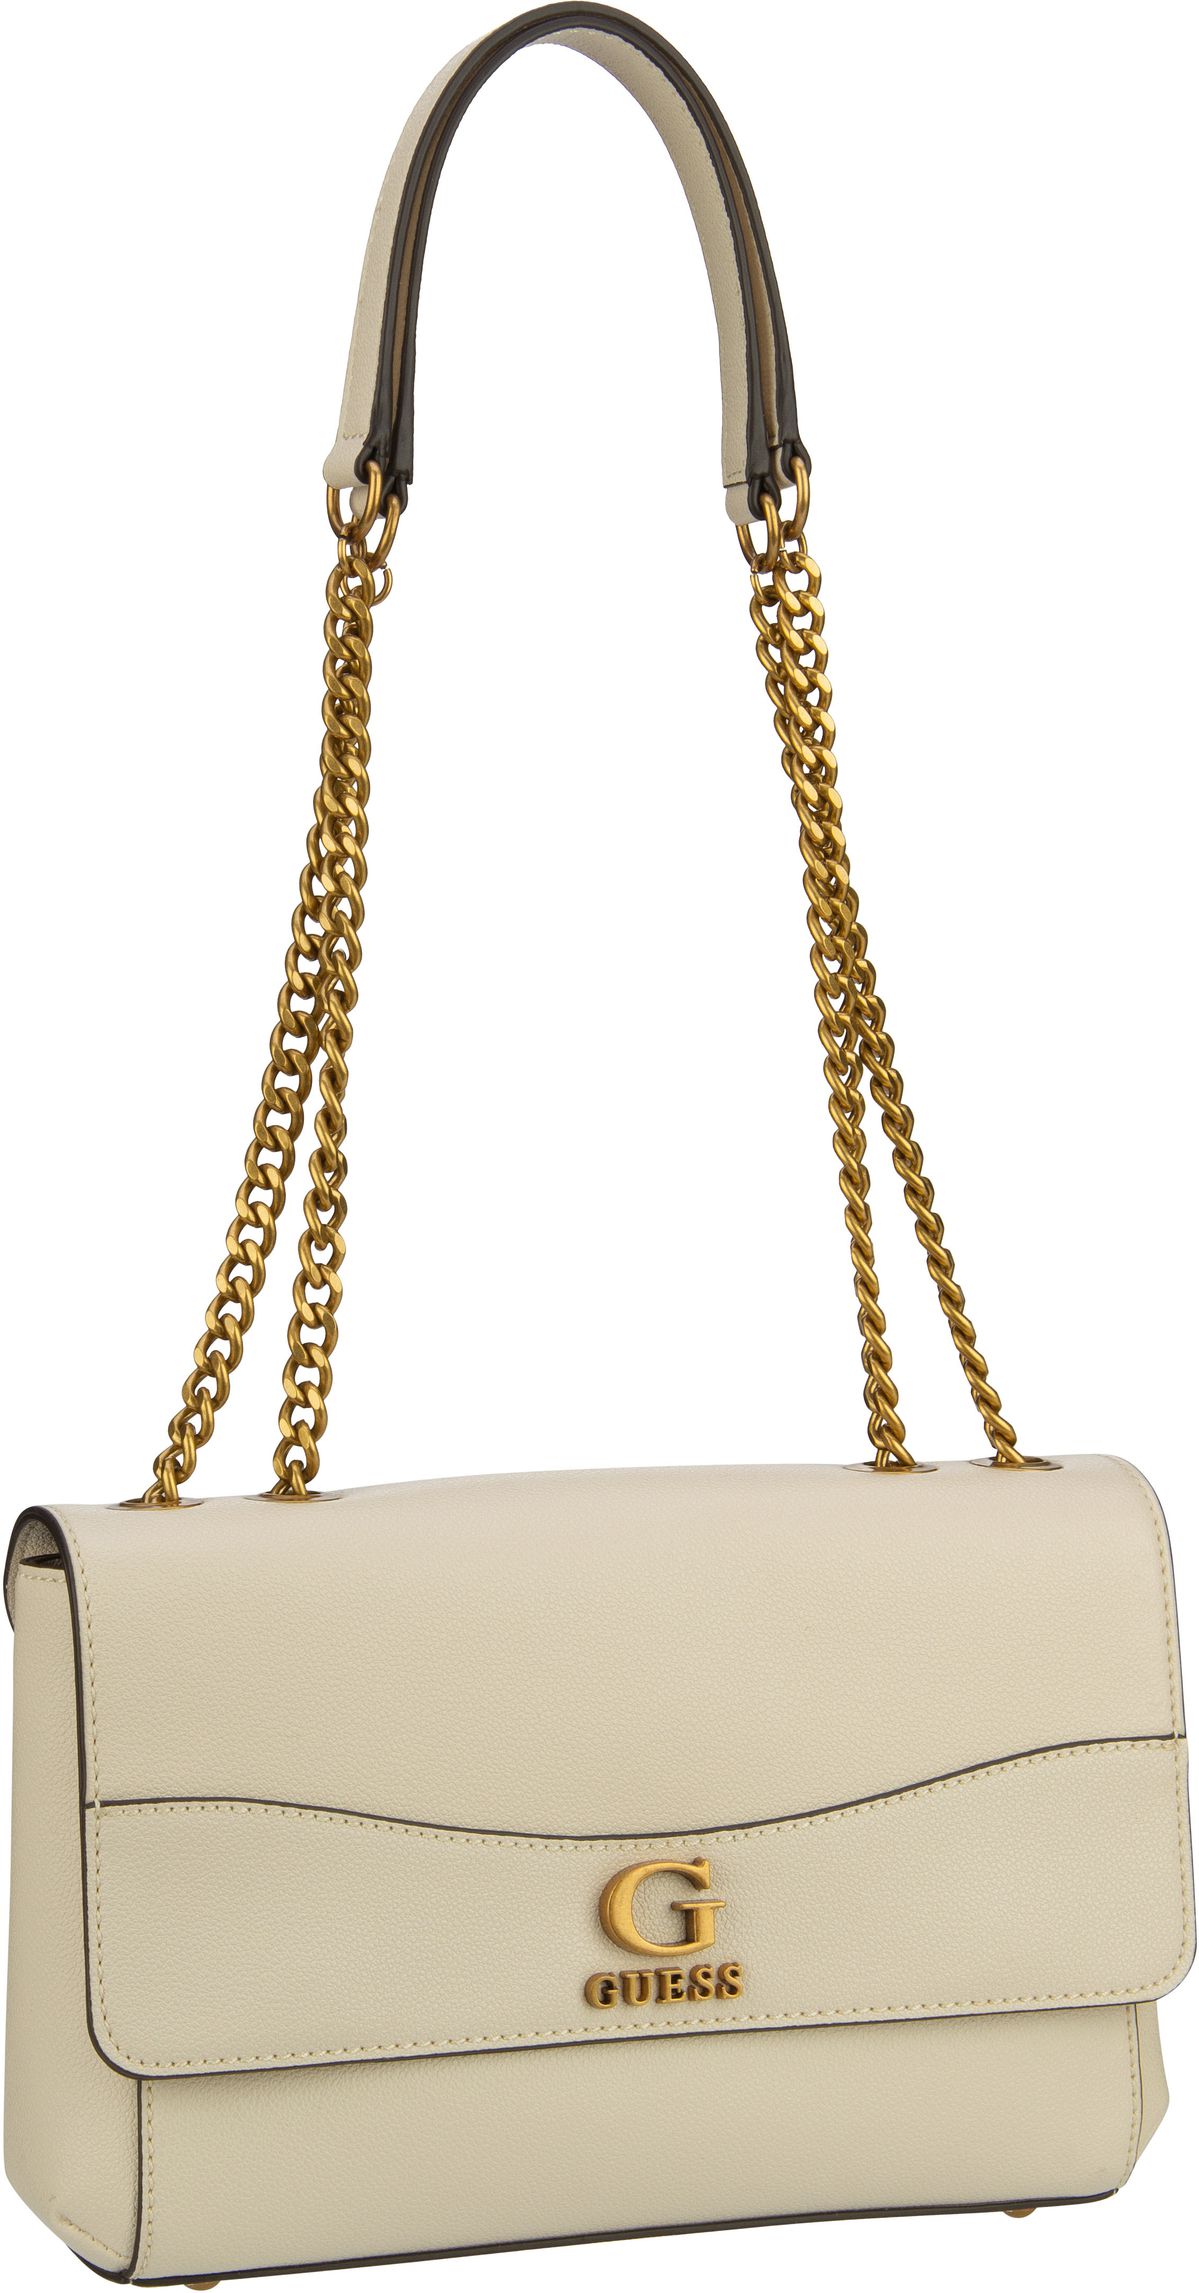 Guess Nell Conv Crossbody Flap - Stone